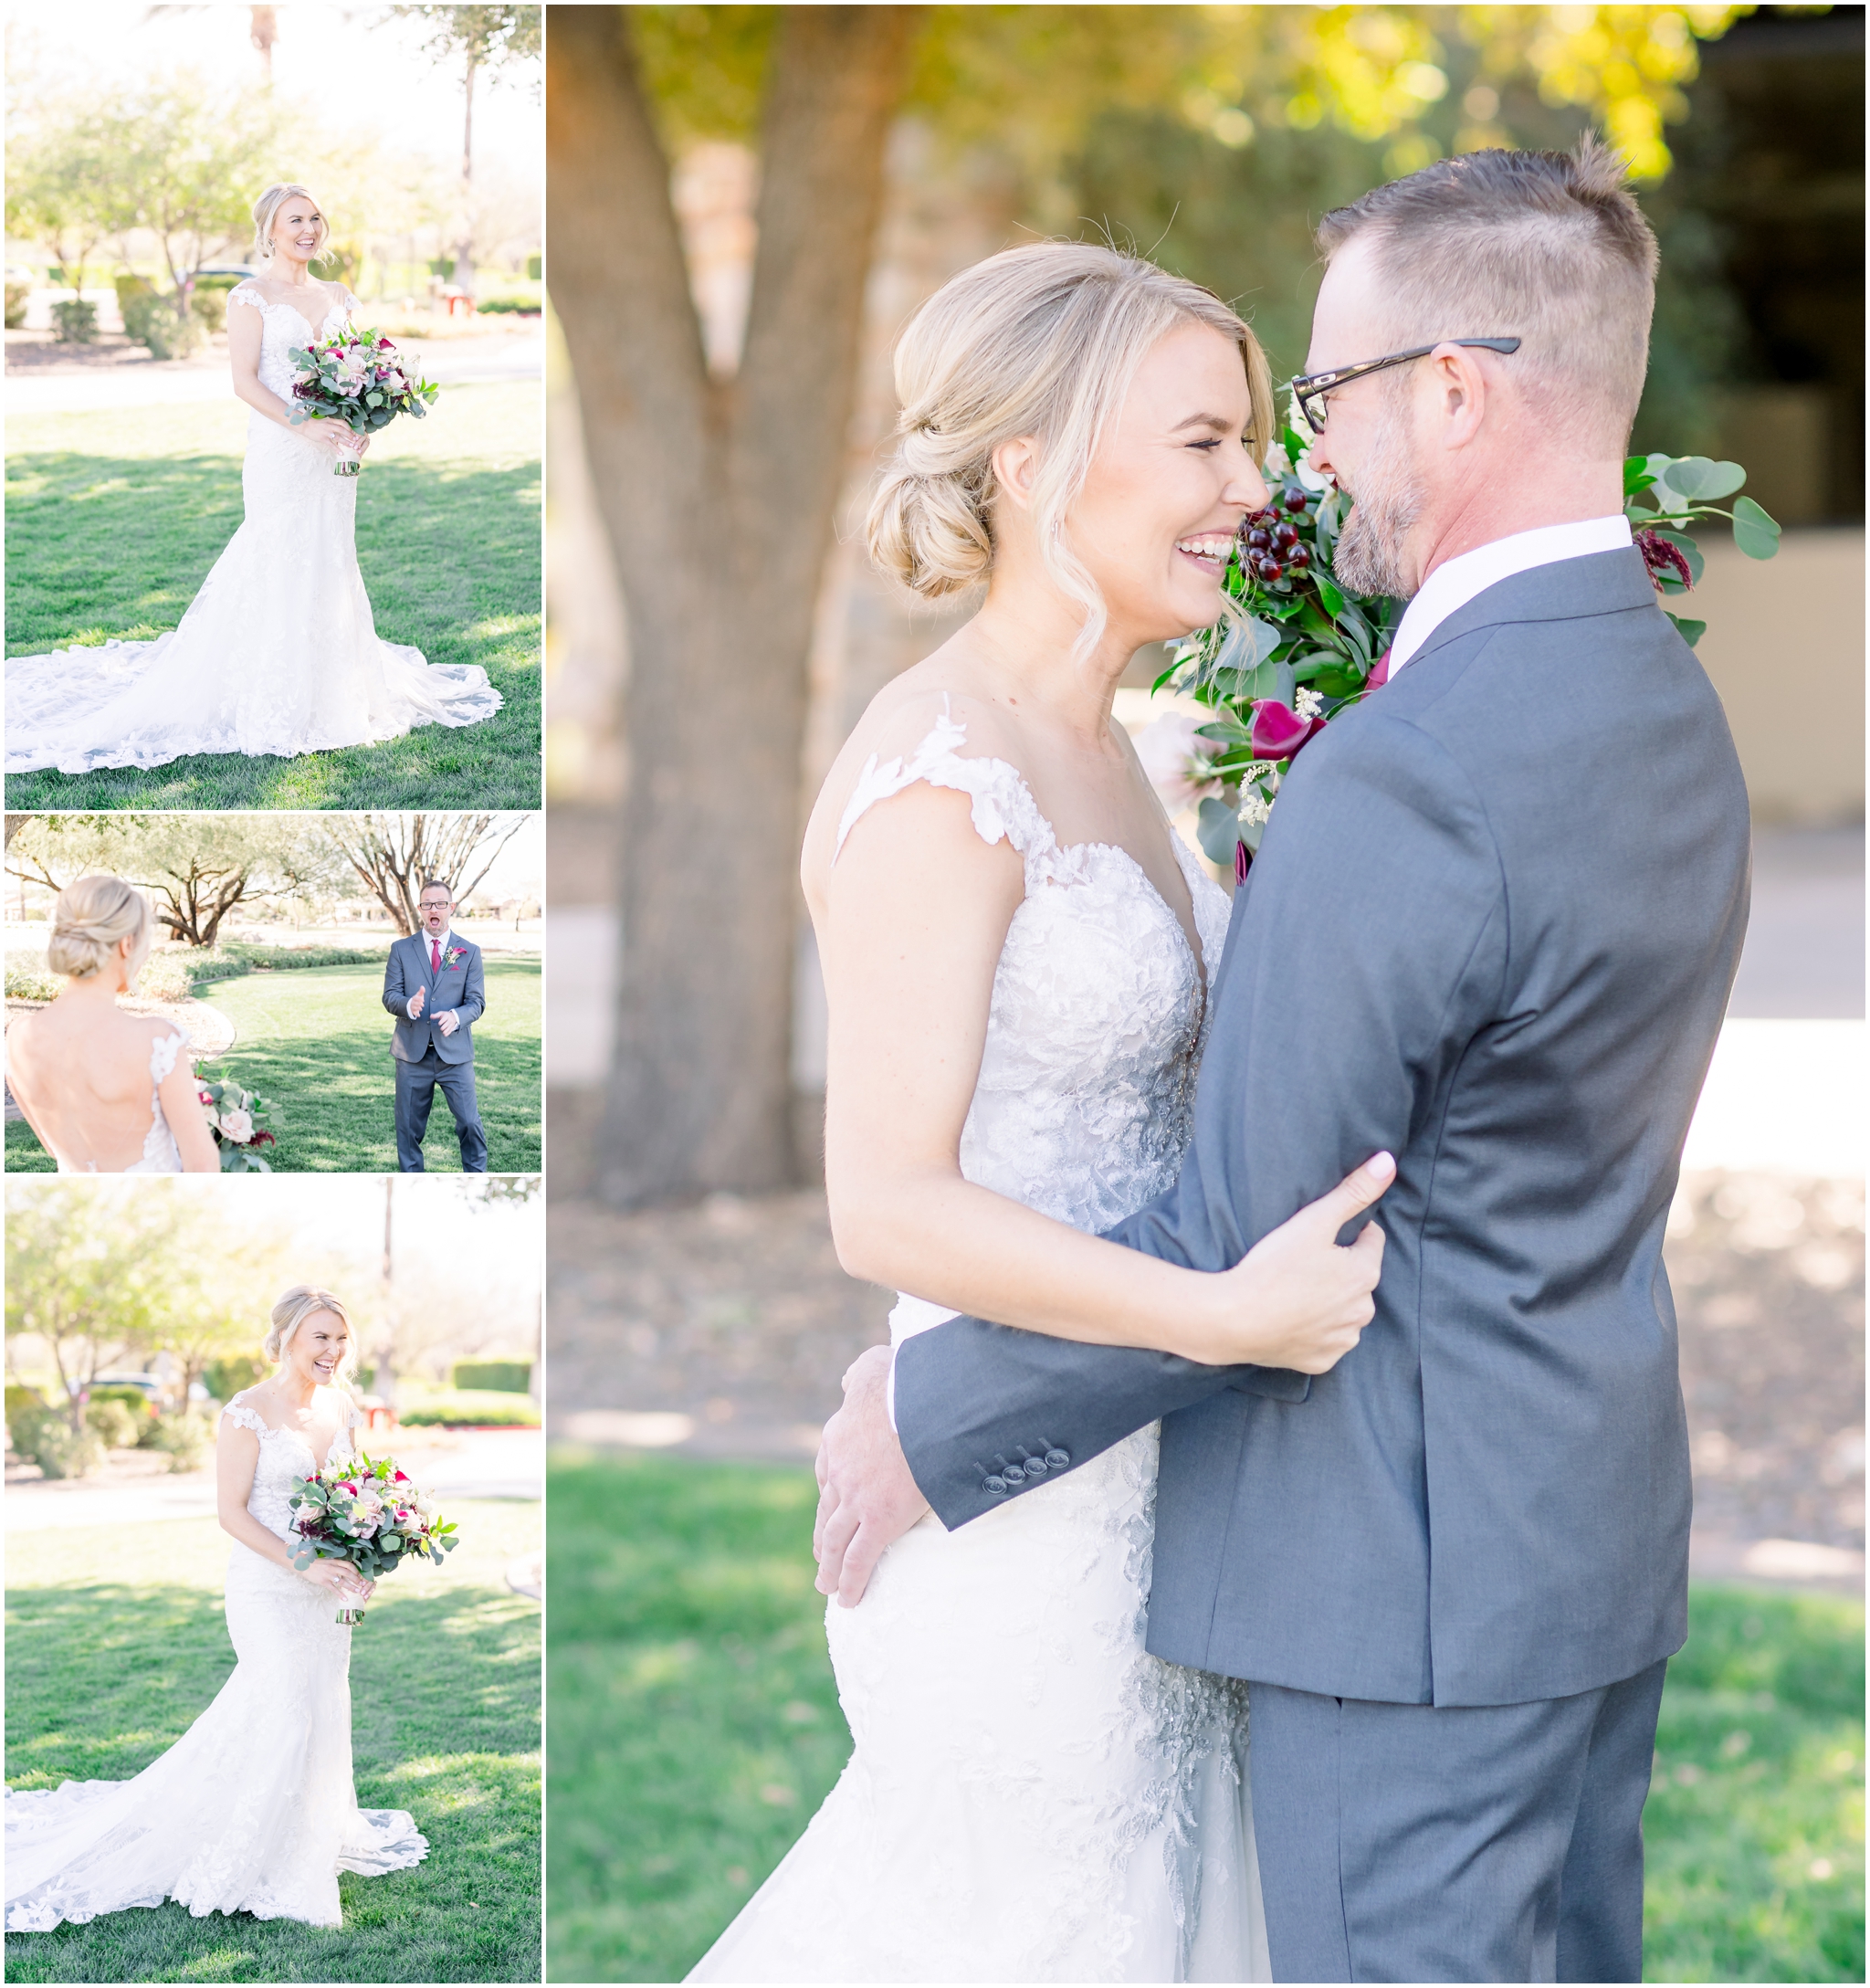 Kiva Club Wedding | Burgundy and Gold Wedding | Wedding Party | Sunset Portraits | Outdoor Ceremony | Outdoor Reception | Burgundy Bridesmaids Dresses | Grey Suits